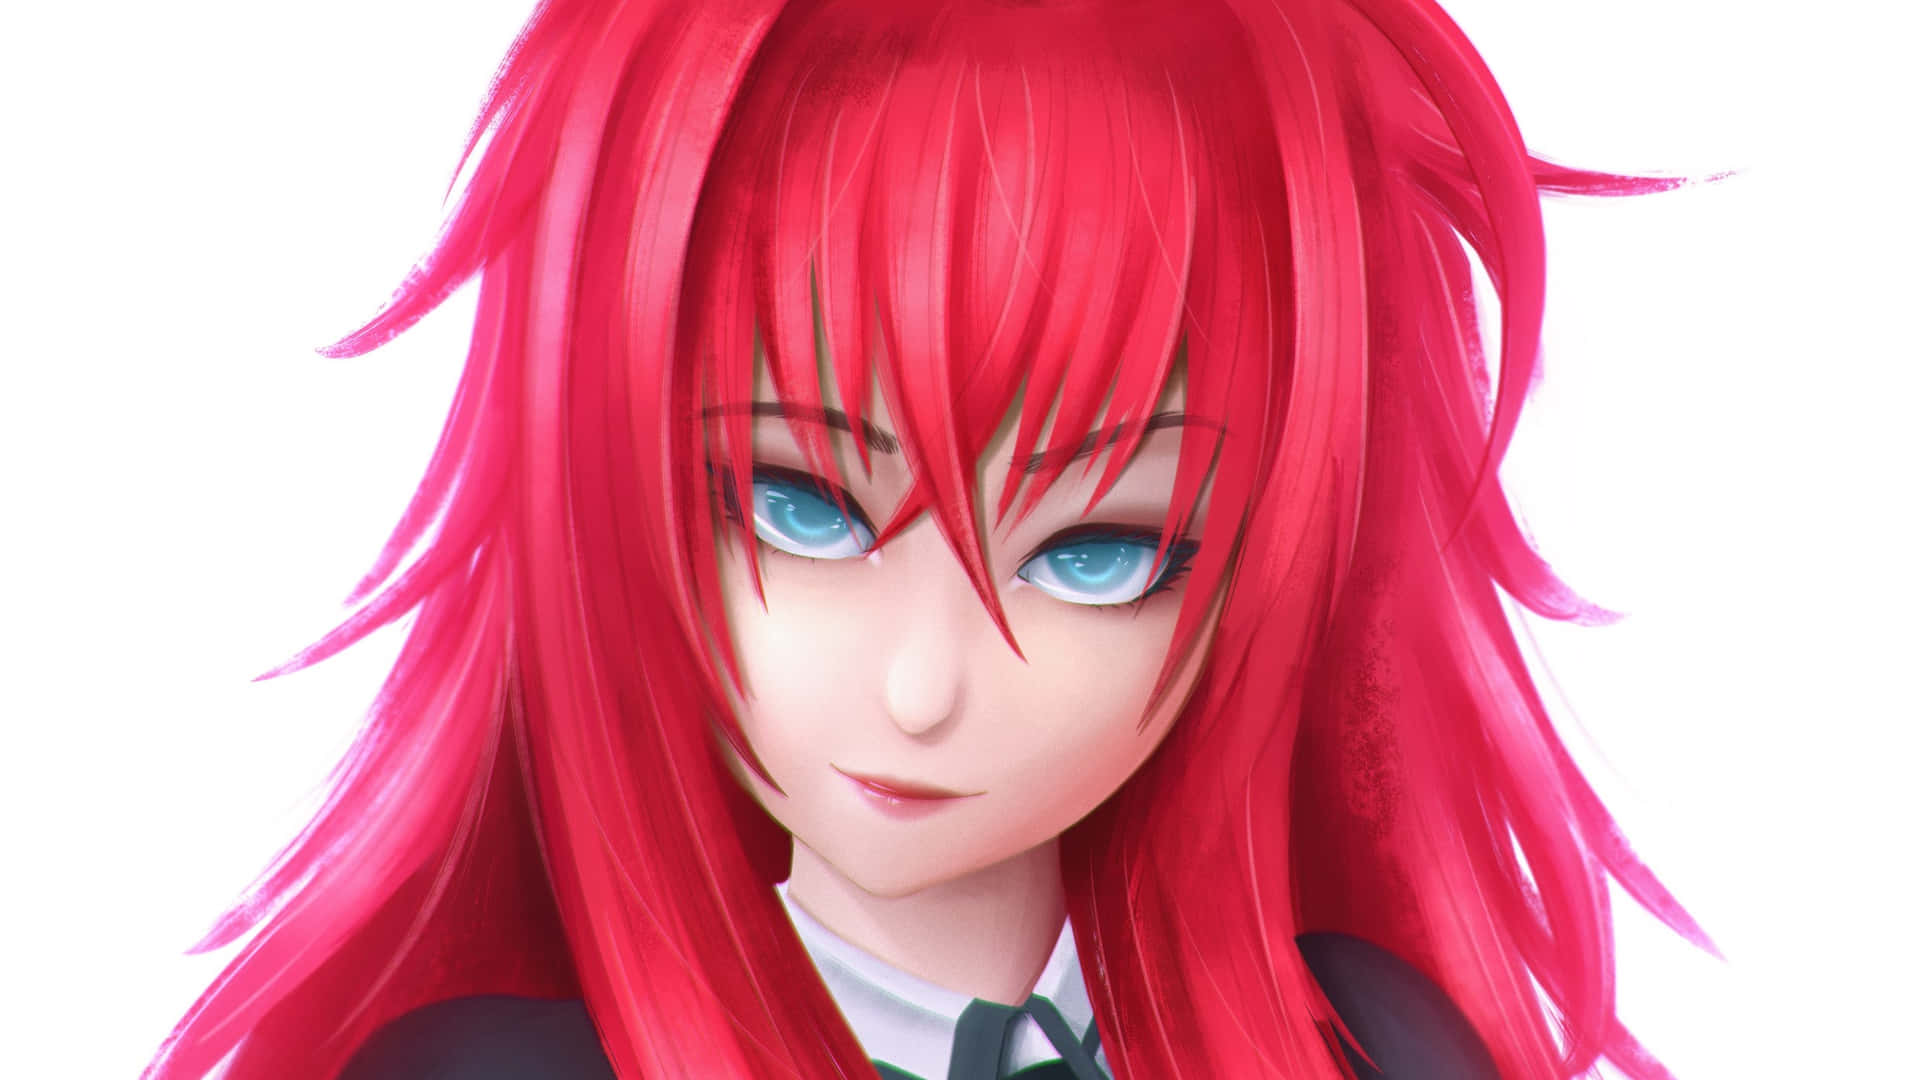 Rias Gremory, the passionate and powerful devil Wallpaper